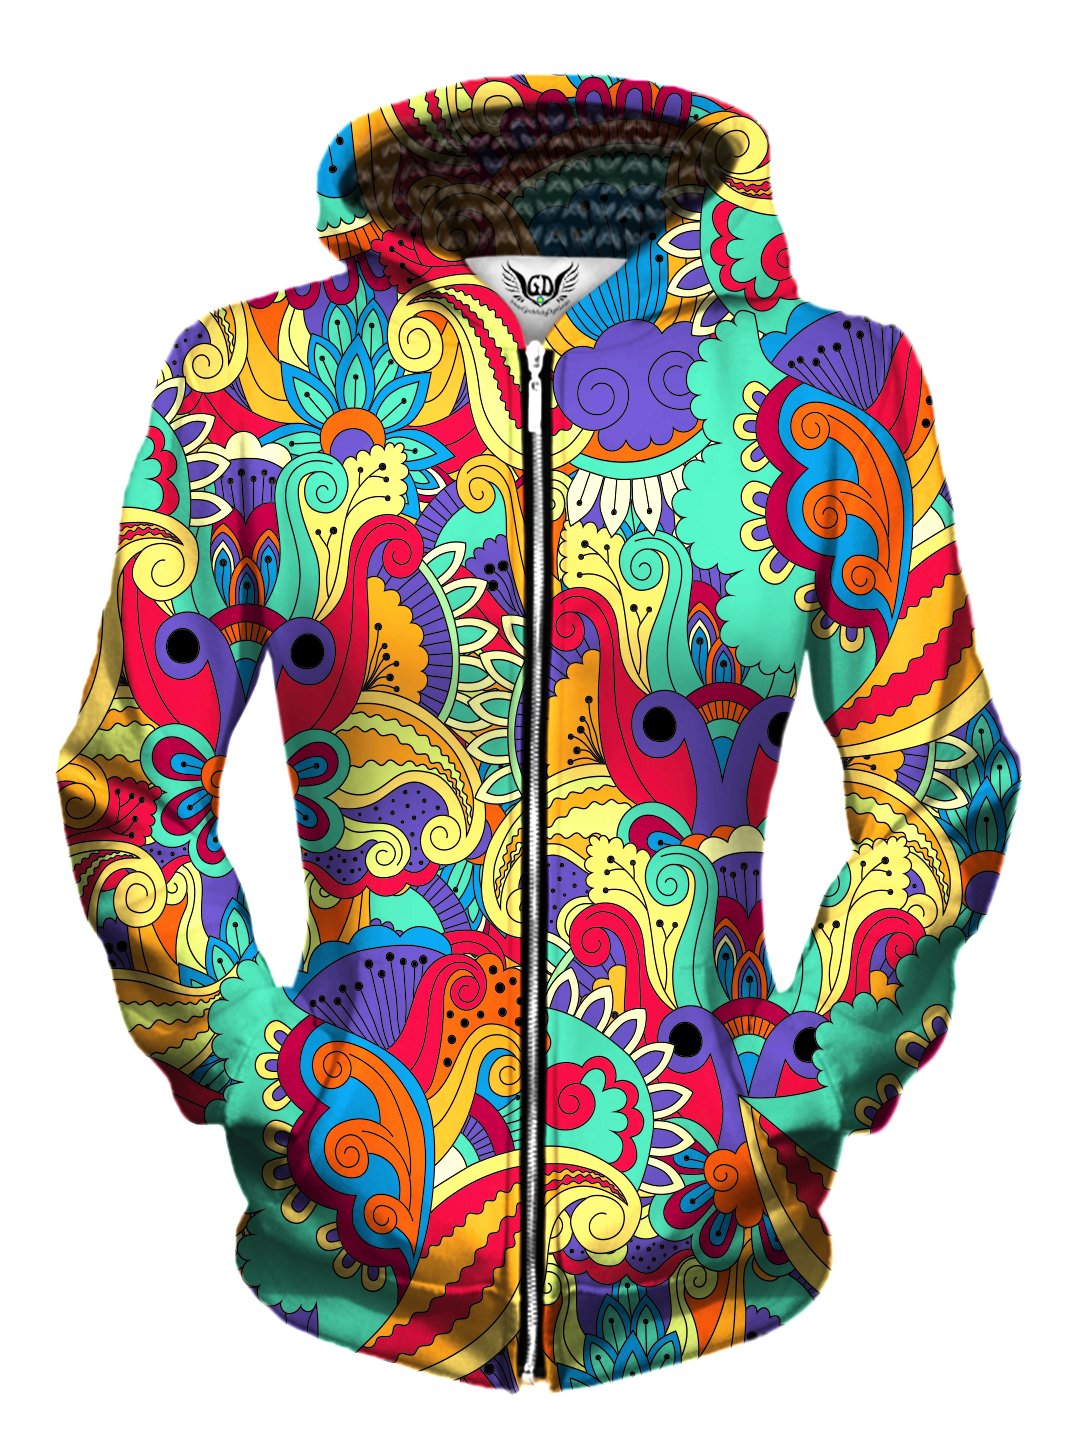 Front view of women's all over print psychedelic floral zip up hoody by Gratefully Dyed Apparel.